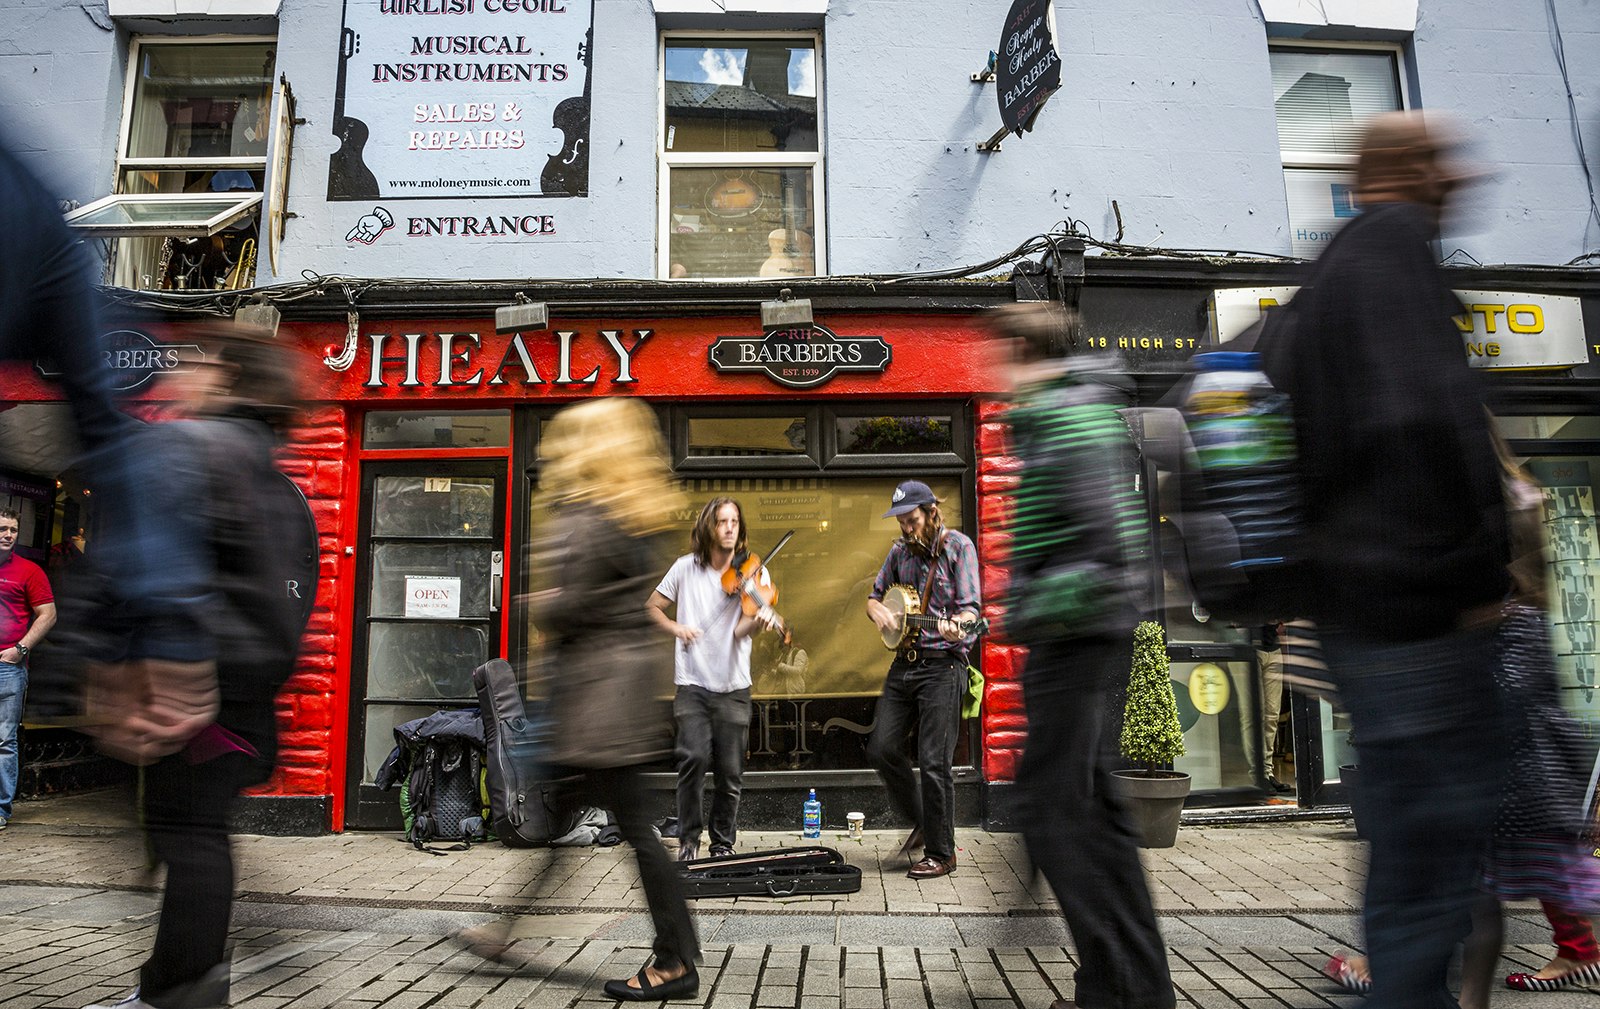 Two buskers play in front of the red facade of a barbershop in Galway. People pass in front of them, blurred by the camera. Galway, Ireland.